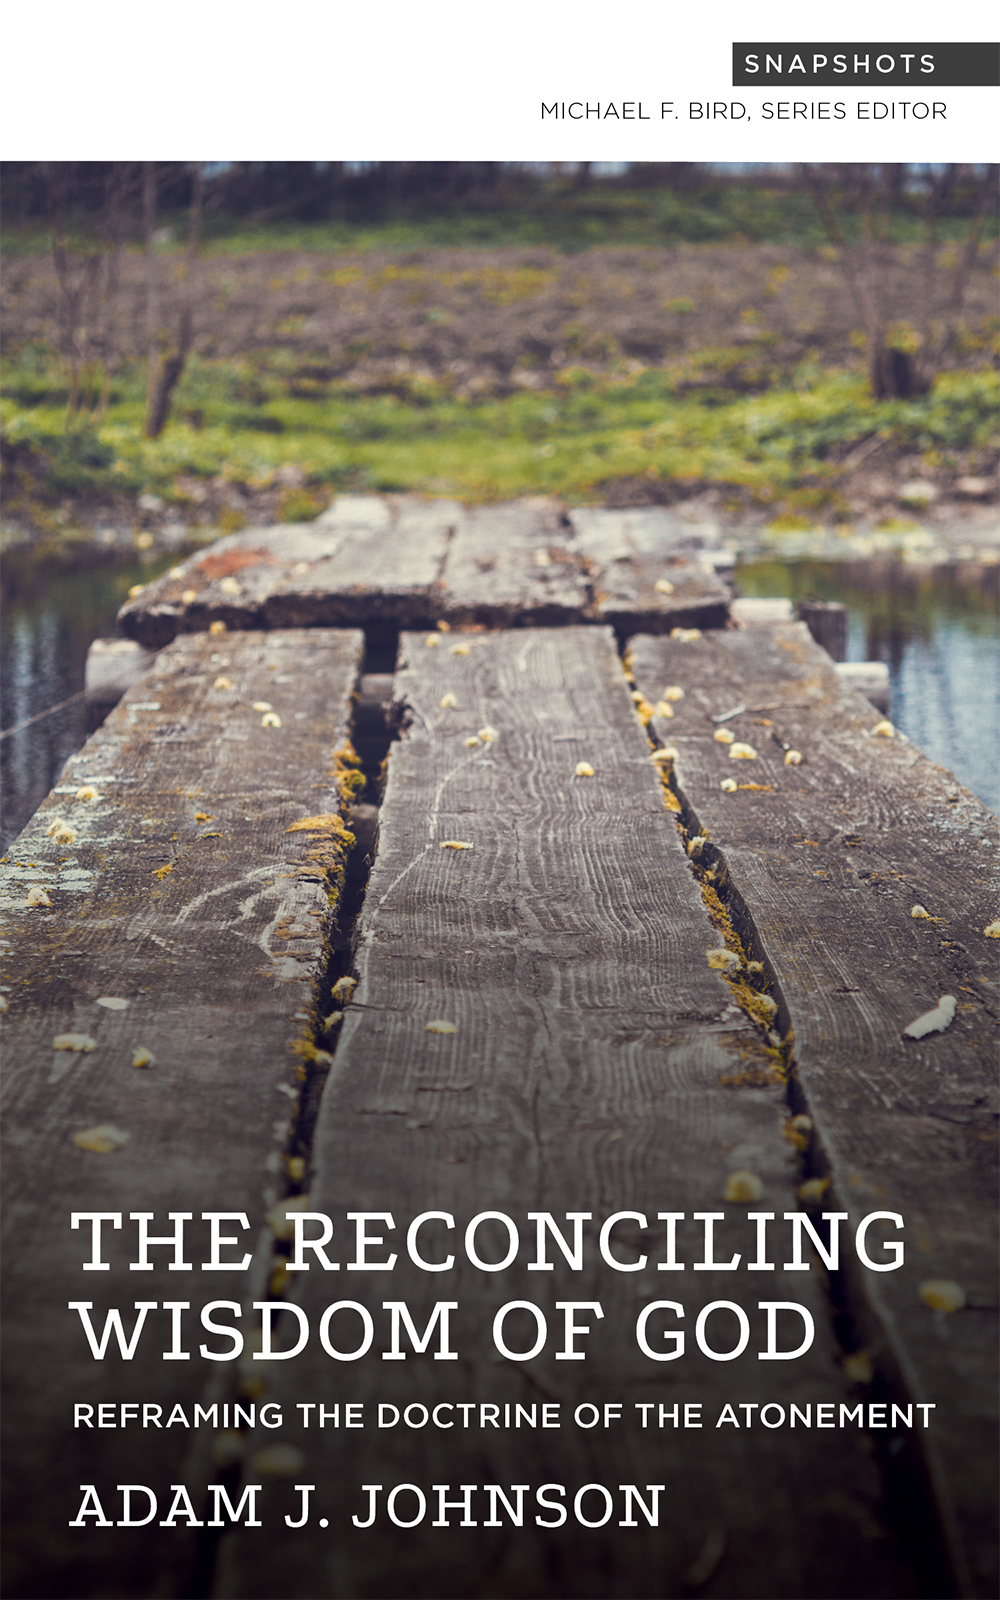 The Reconciling Wisdom of God Reframing the Doctrine of the Atonement - image 1